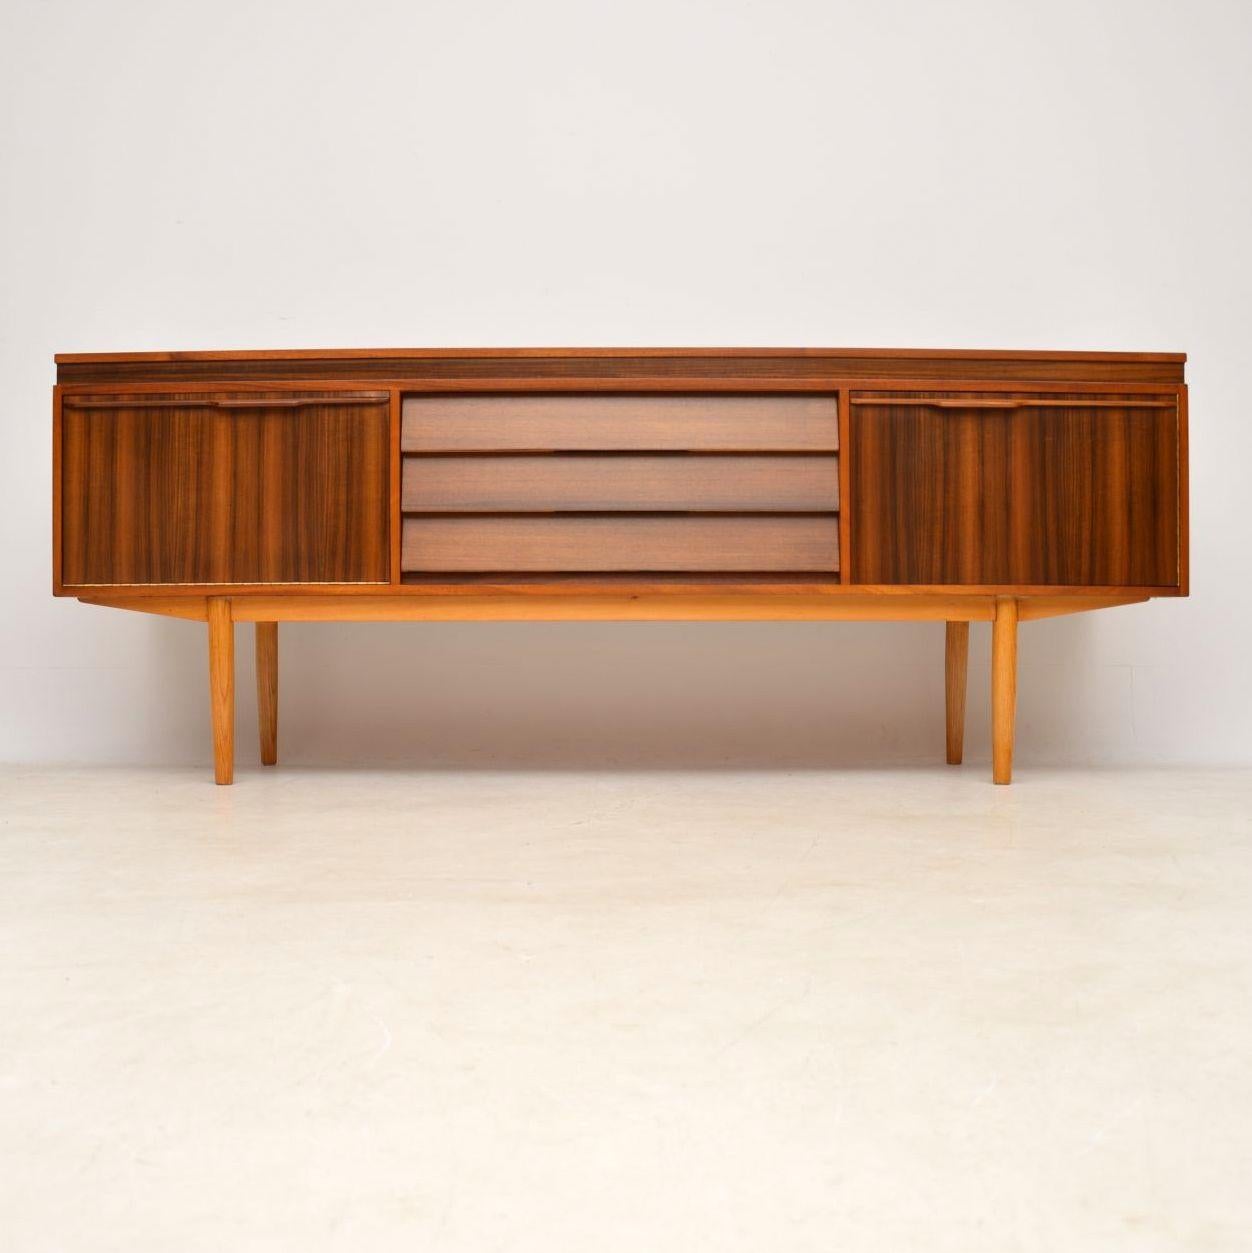 A stylish and extremely well made vintage sideboard in Walnut, this was designed by Neil Morris and was made by Morris of Glasgow in the 1960’s. We have had this stripped and re-polished to a very high standard, the condition is superb